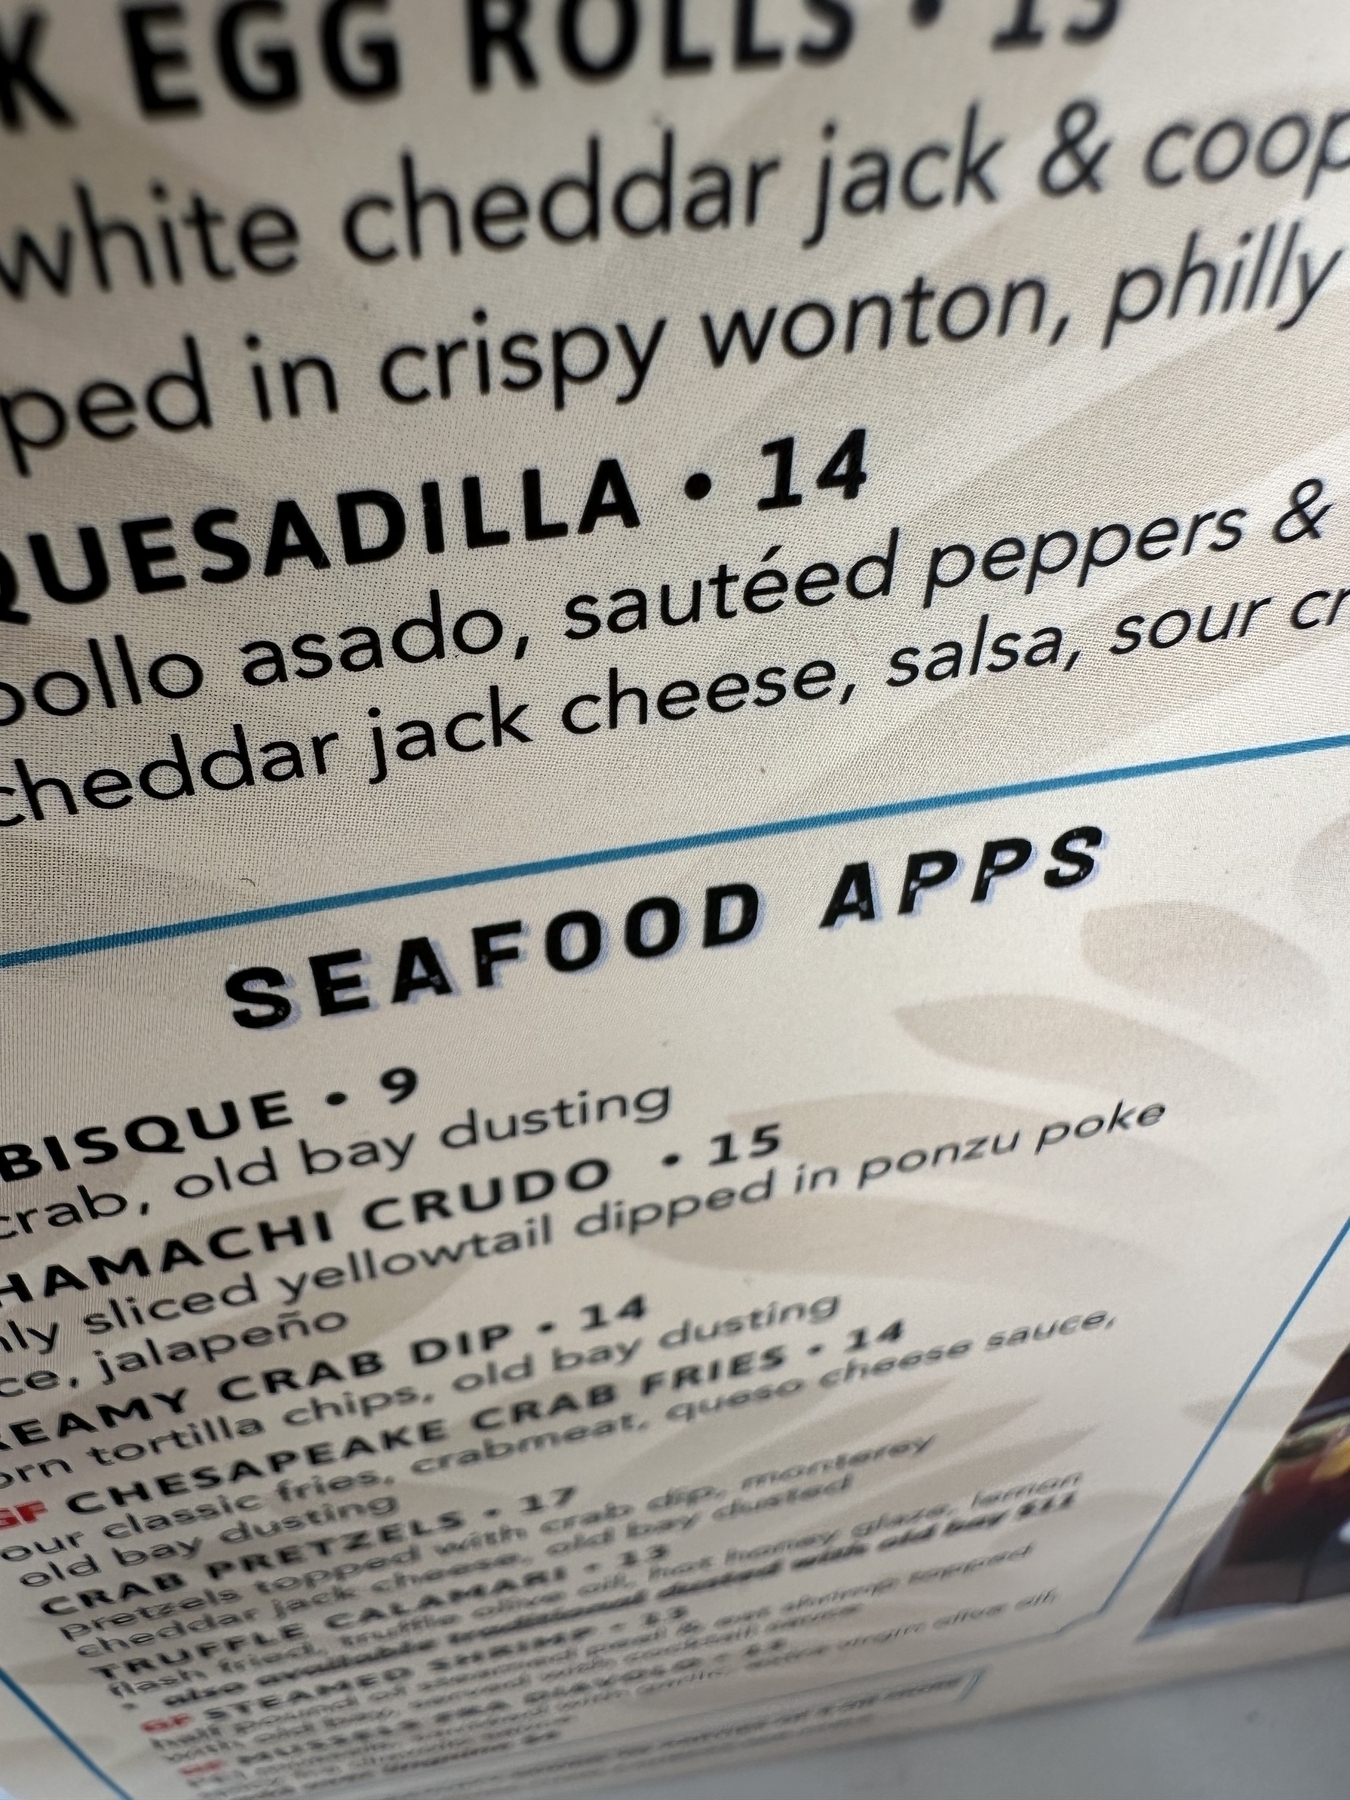 Menu with “seafood apps”